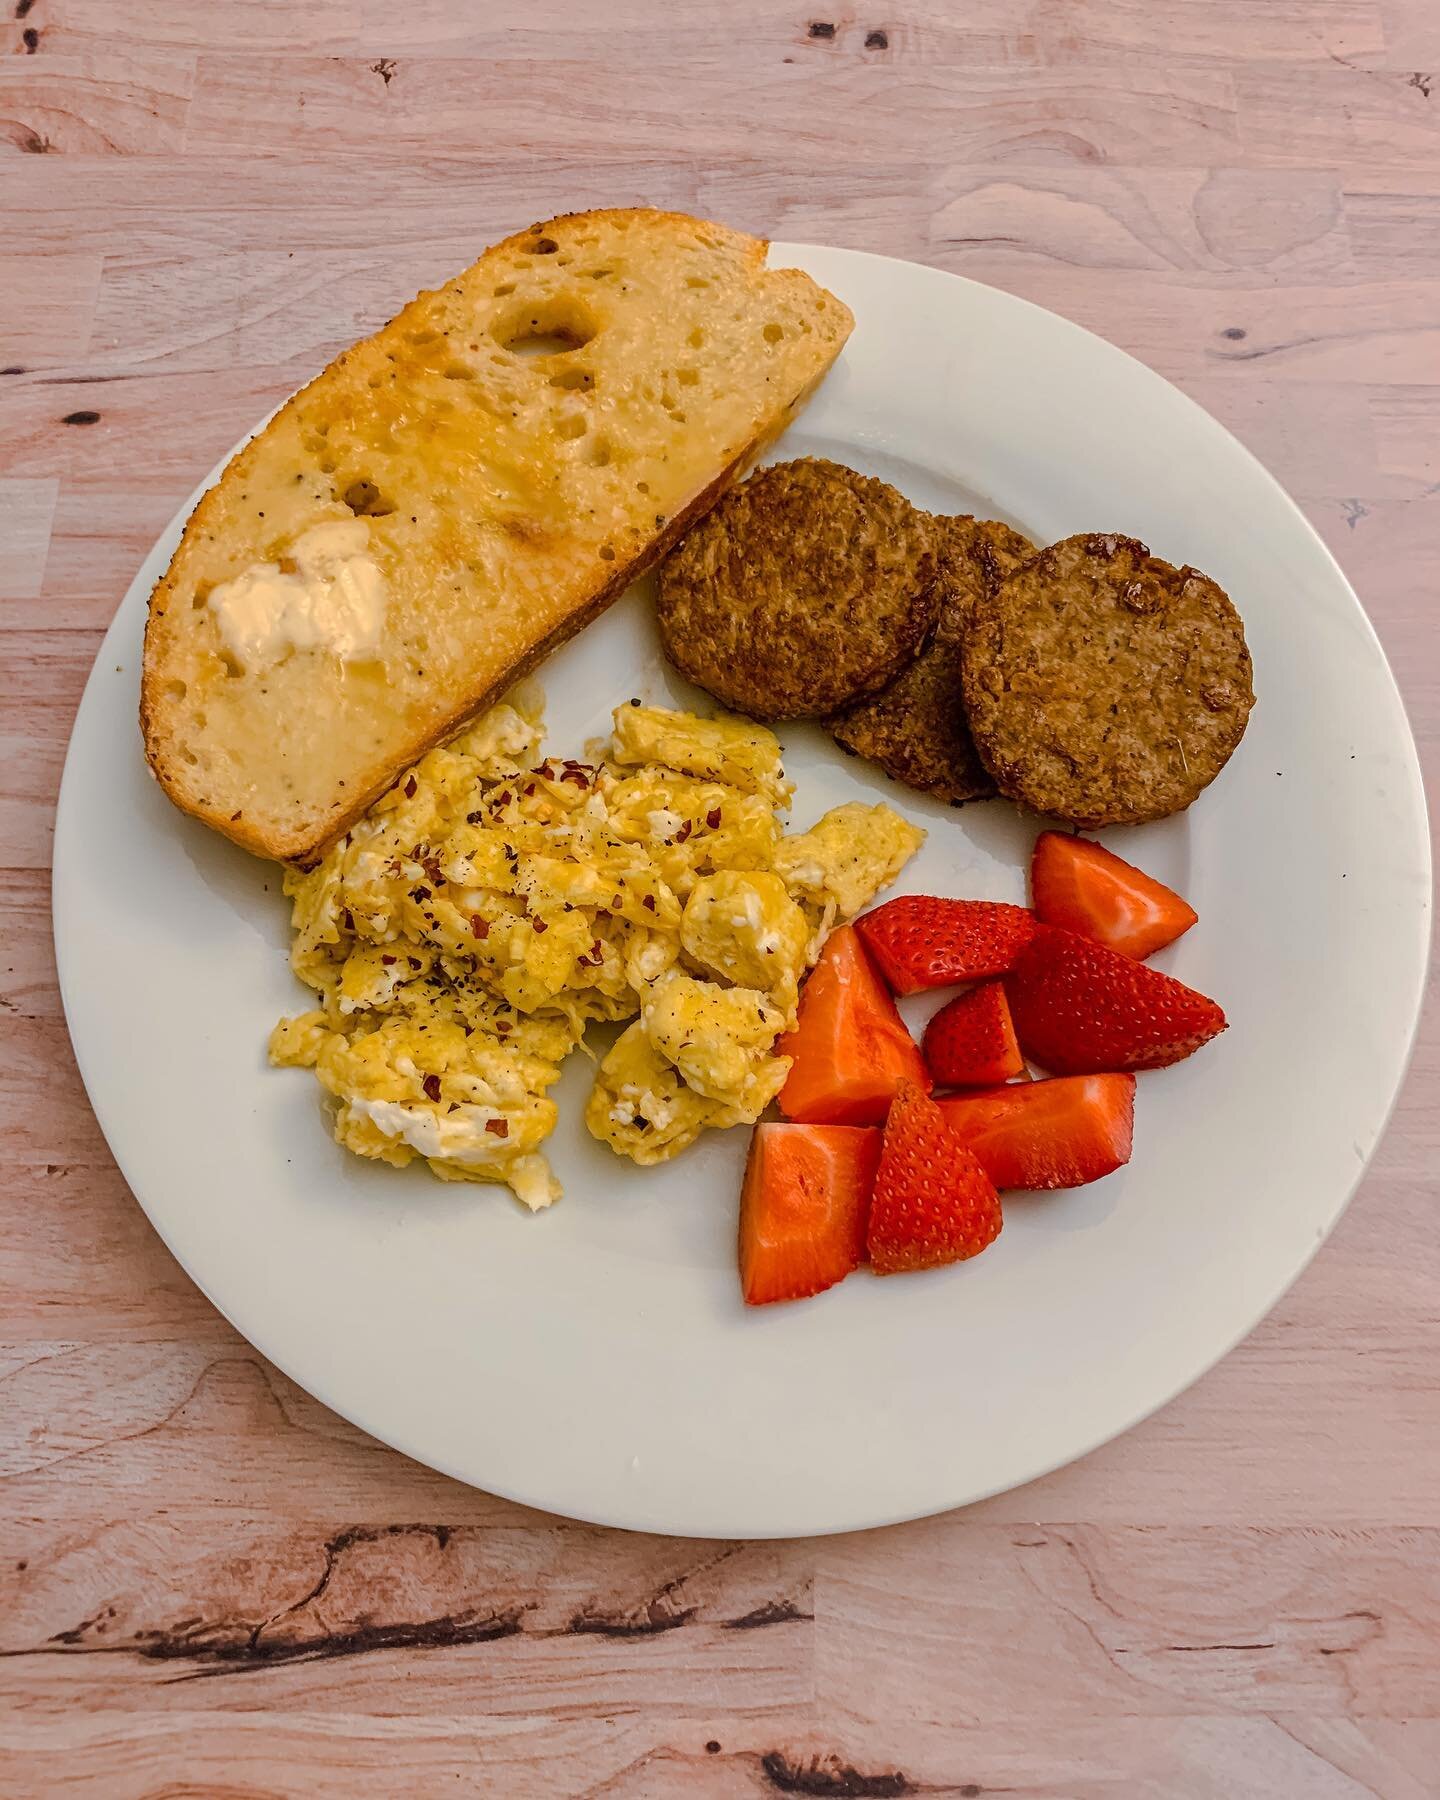 ✨Dinner was a quick and easy one, as we were pretty busy today. Breakfast for dinner is always a go-to. These are the @beyondmeat vegan breakfast sausages and they are SO good. I really think they could fool an omnivore! 
✨Also a huge shout out to @s